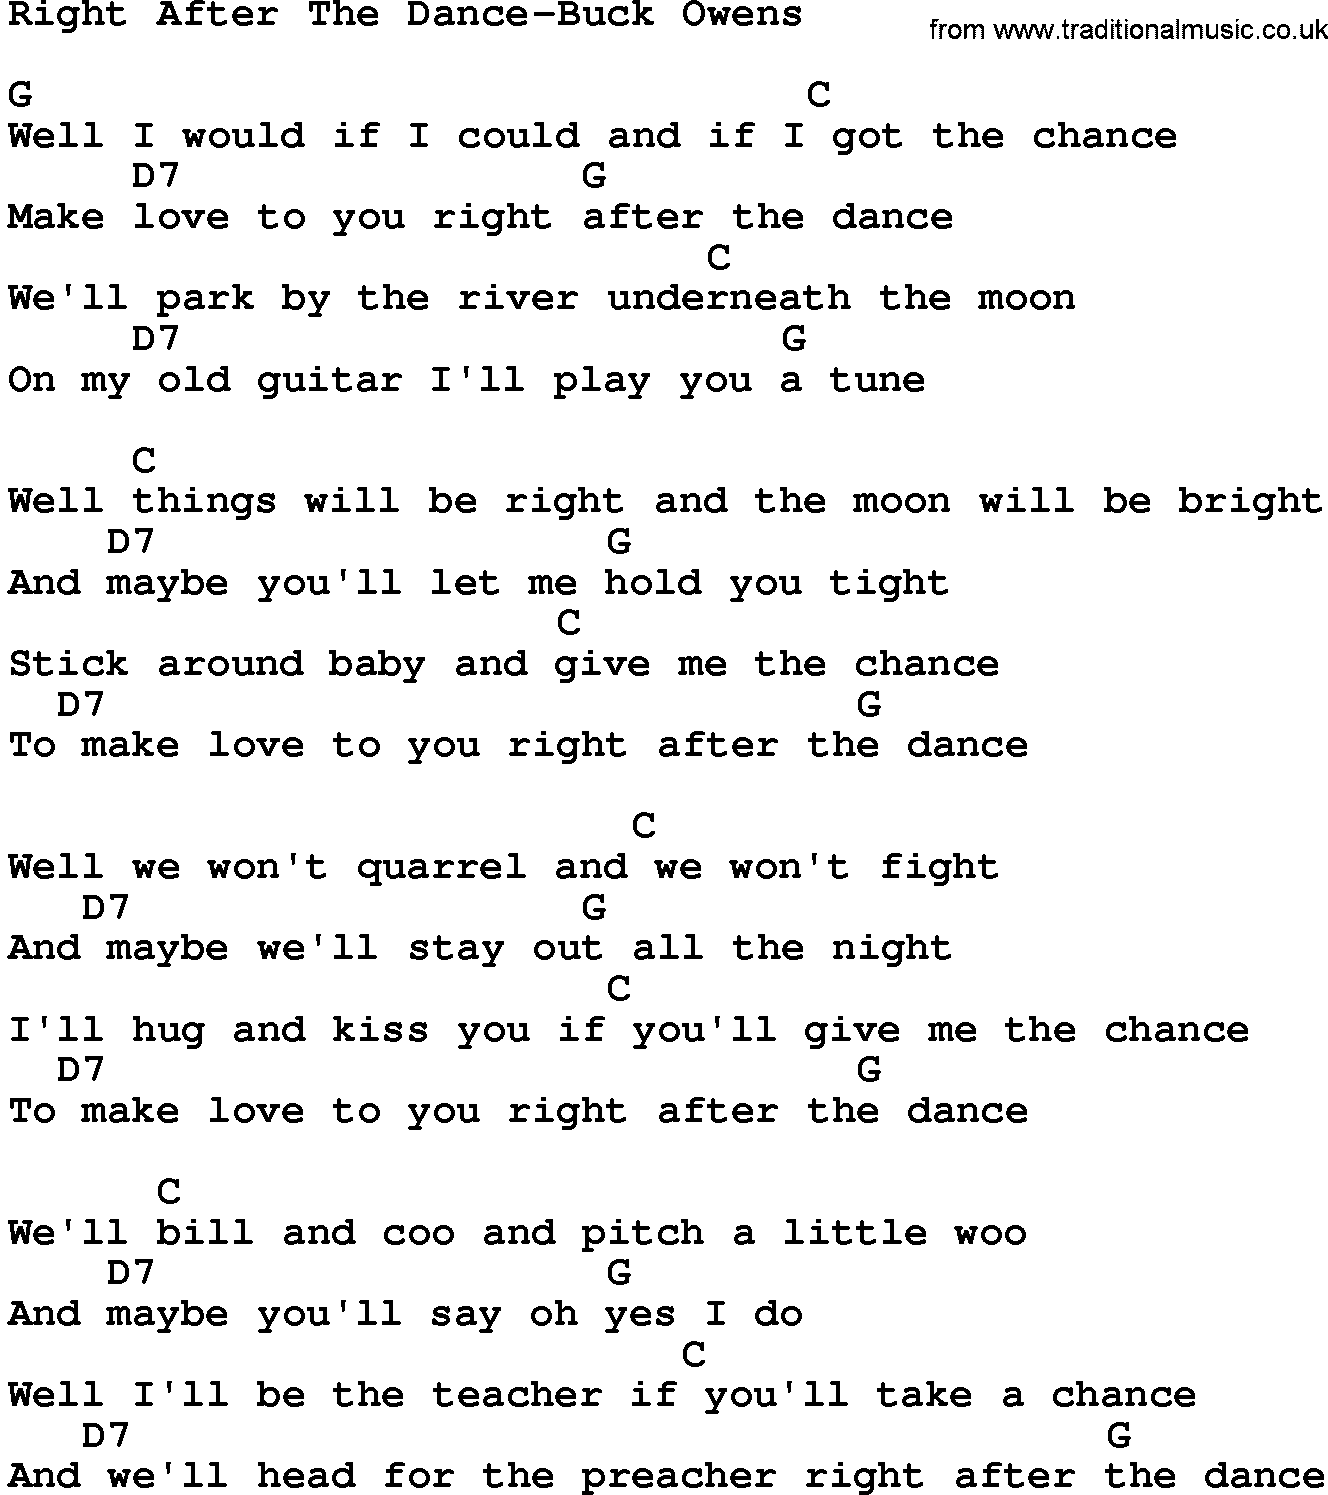 Country music song: Right After The Dance-Buck Owens lyrics and chords